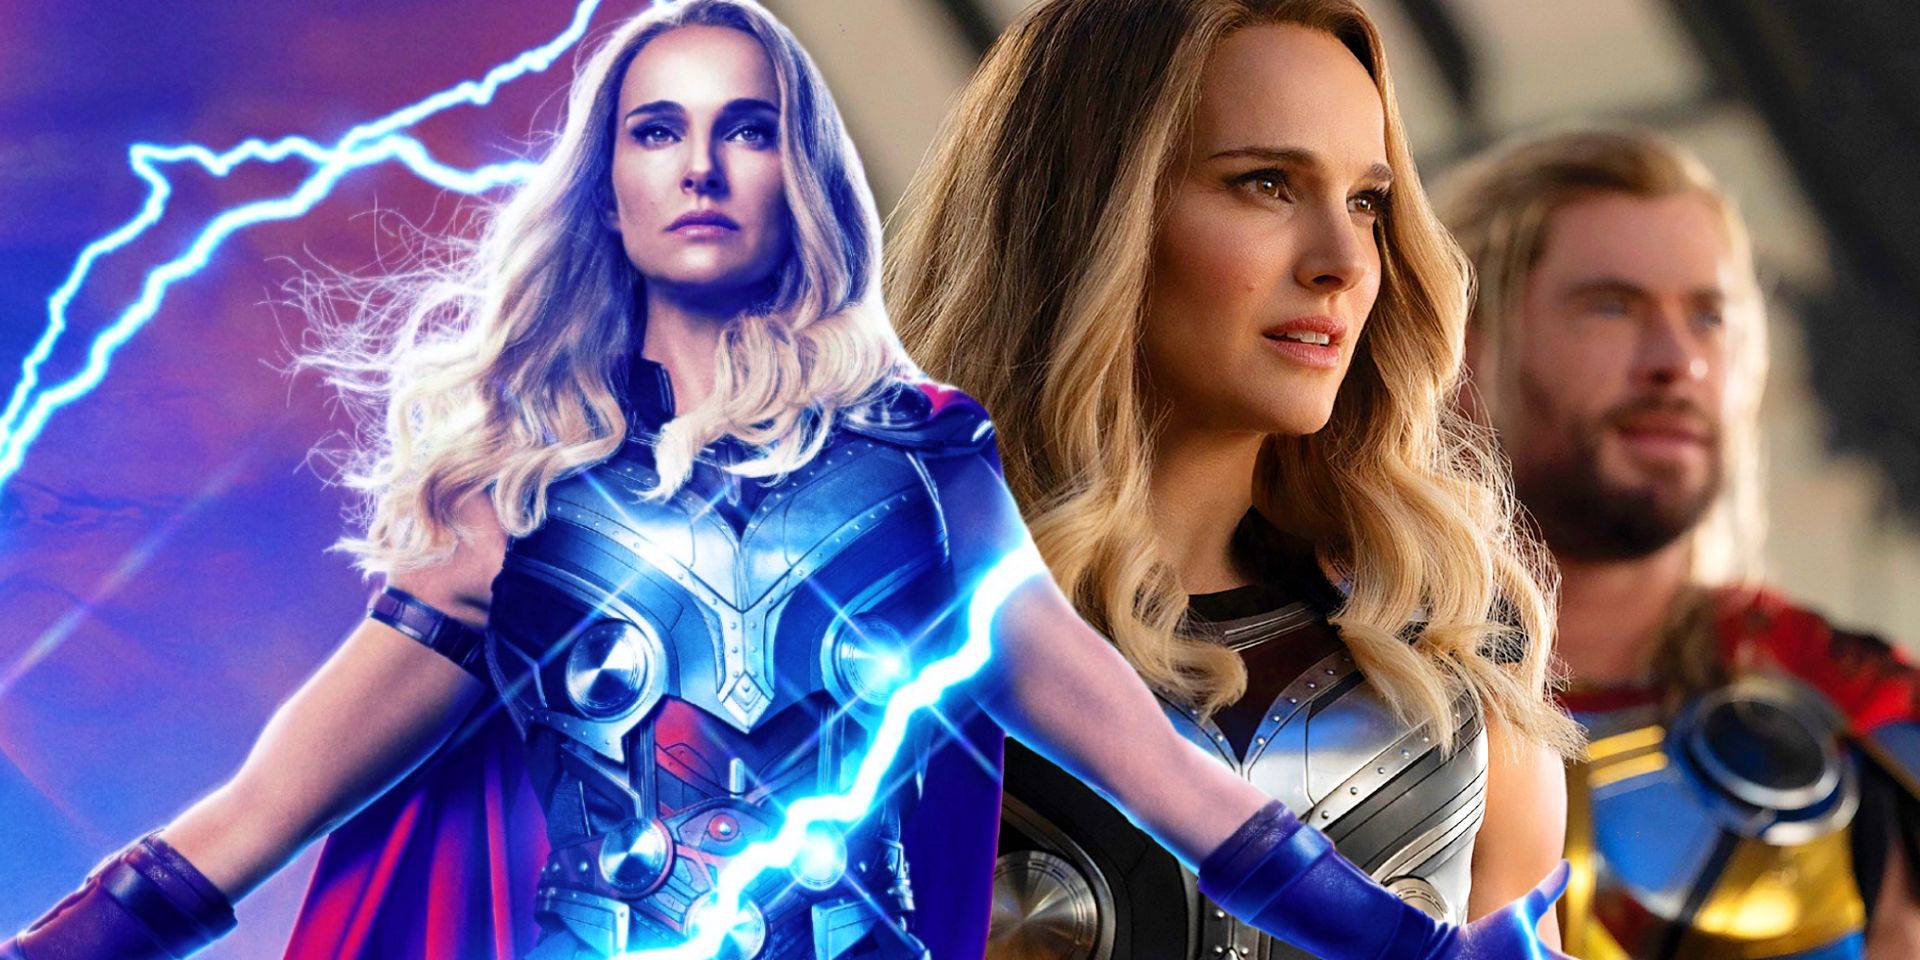 Natalie Portman as Mighty Thor in Love and Thunder